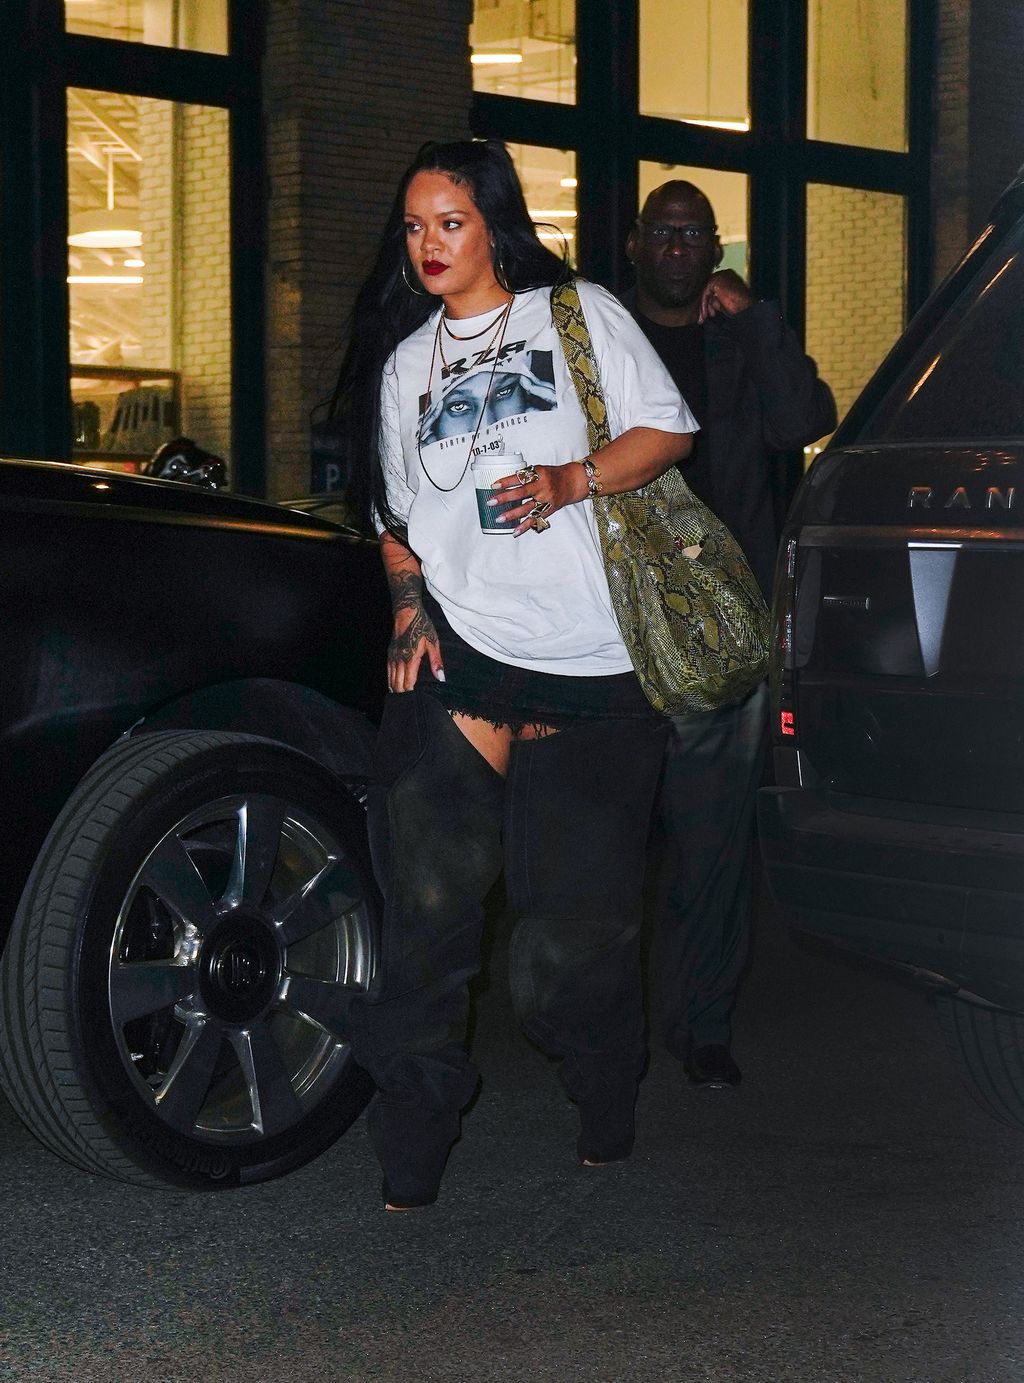 NEW YORK, NEW YORK - AUGUST 12: Rihanna is seen out and about on August 12, 2022 in New York City. (Photo by Gotham/GC Images)